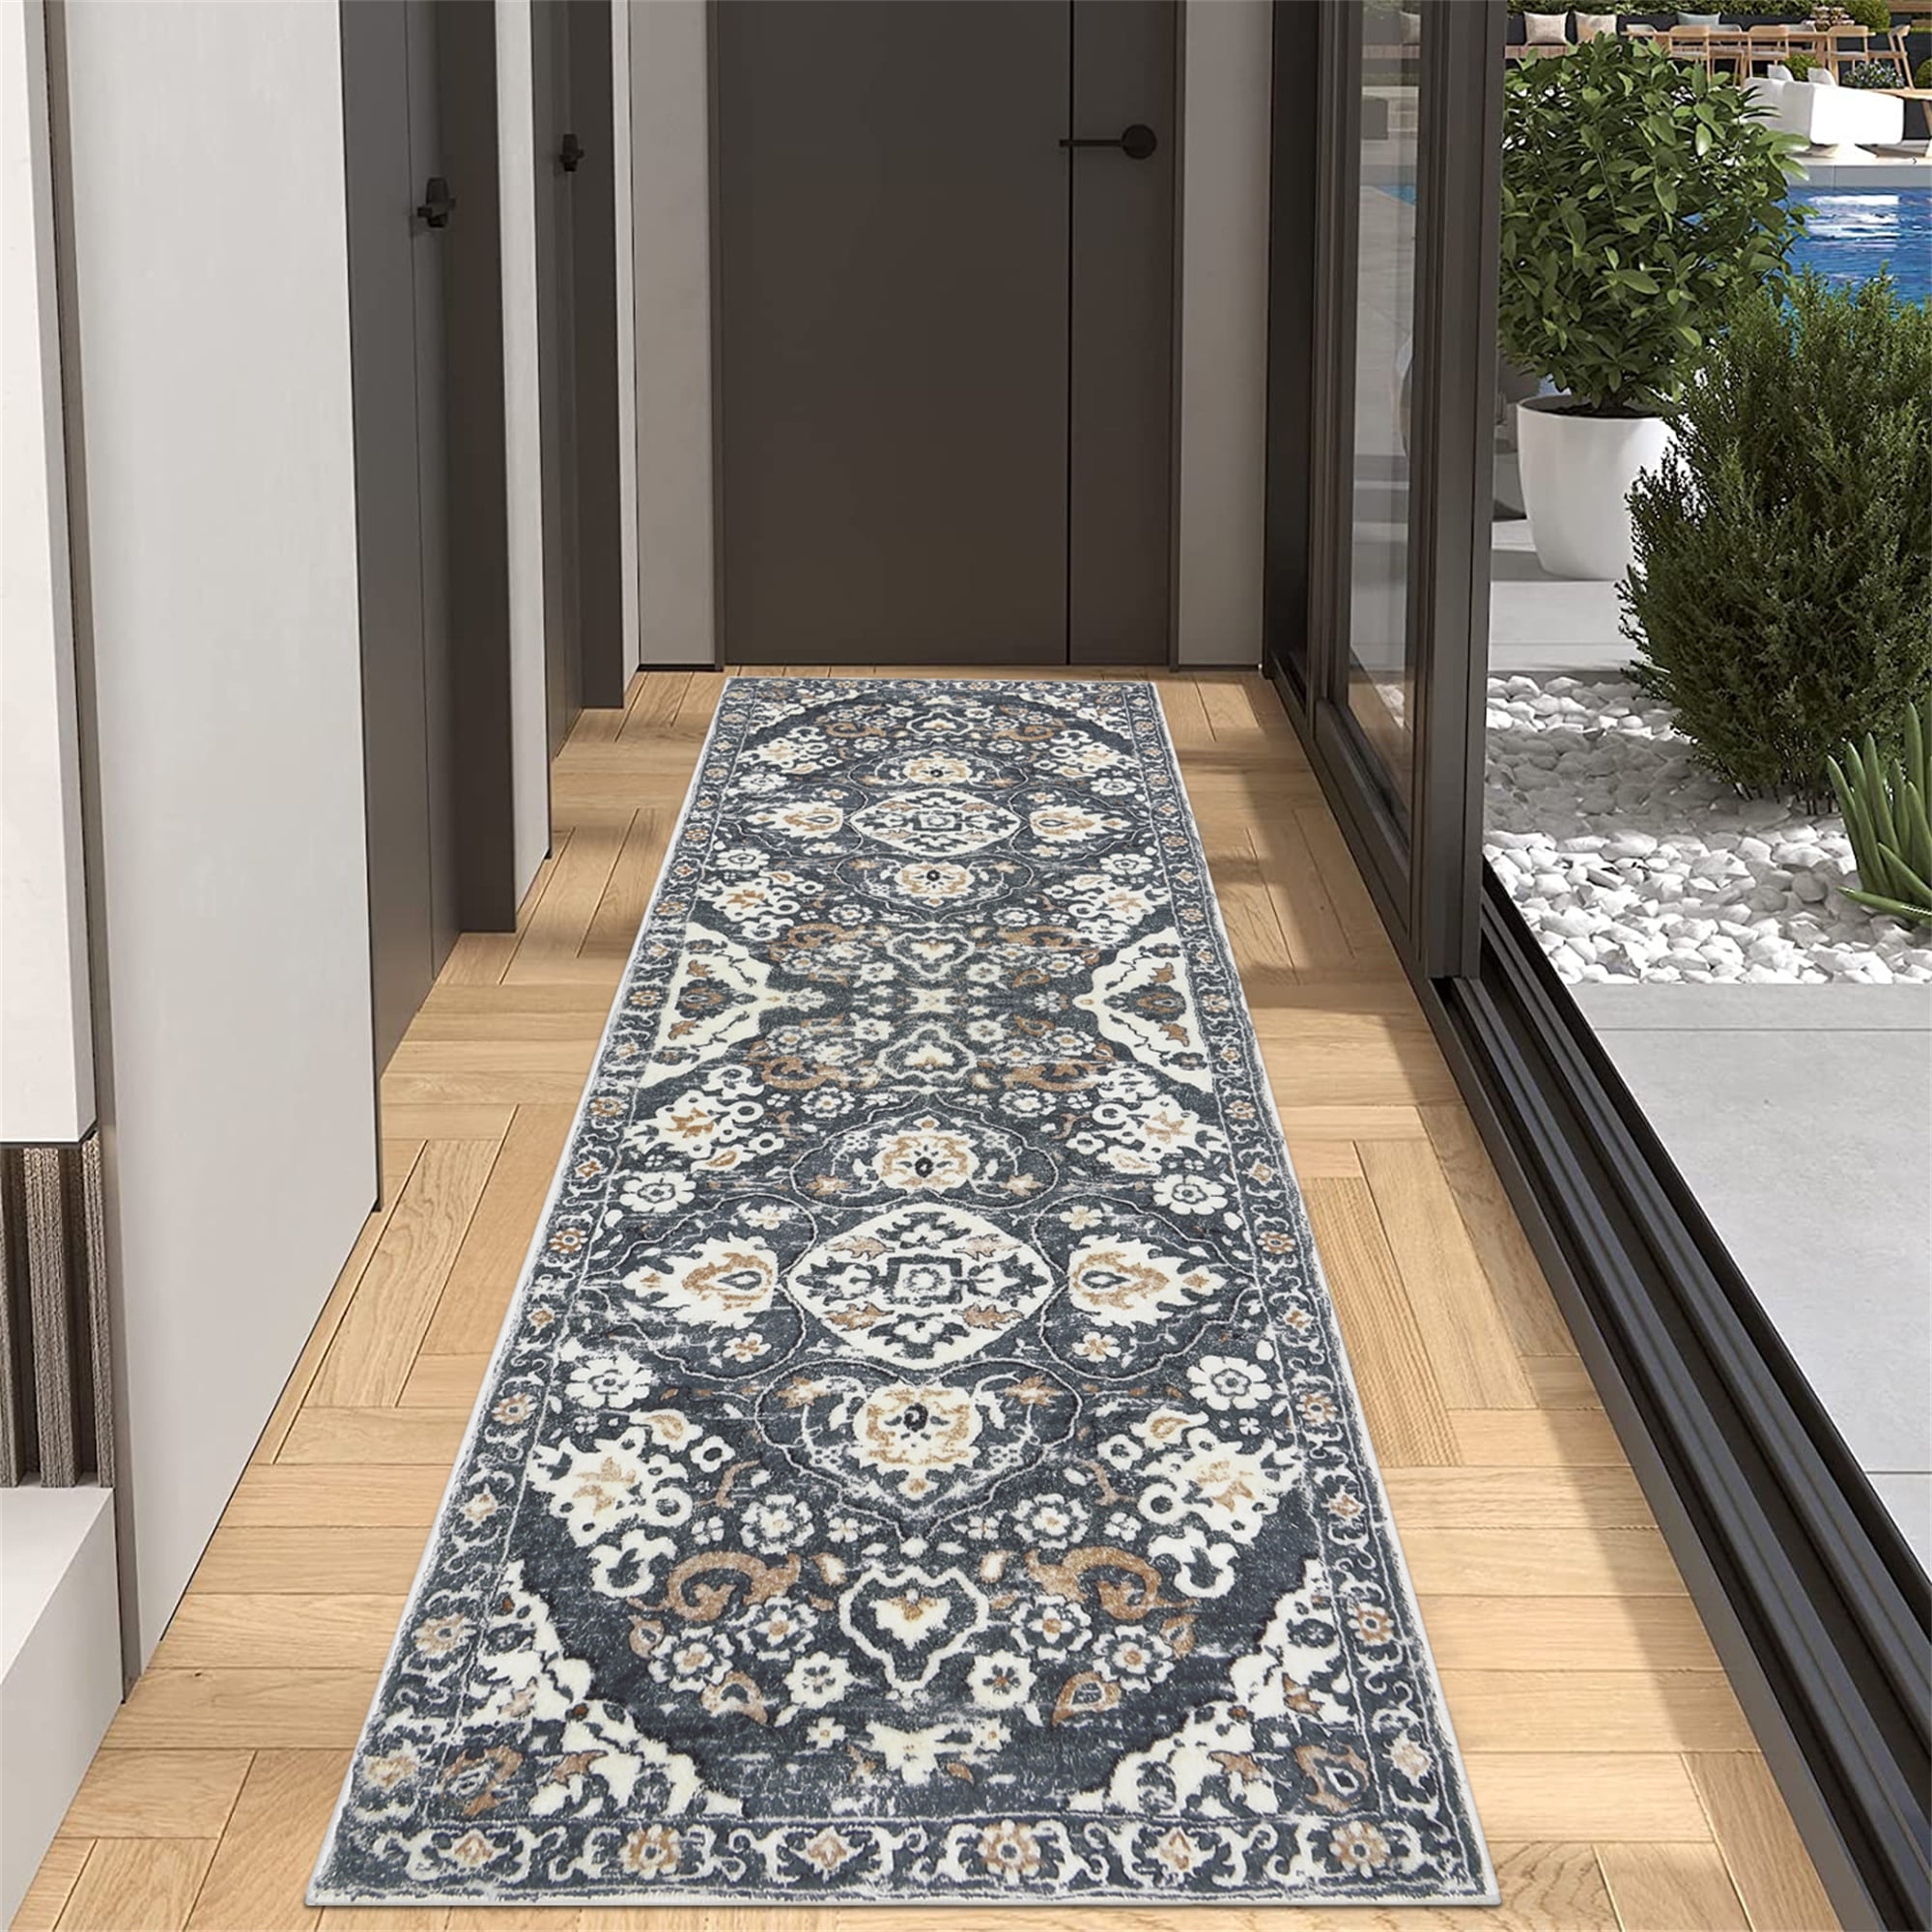  Runner Rug 2FT x 6FT, AYOHA Utility Carpet Runner for Entryway  Hallway Aisles Balcony Garages, Area Rugs with Non-Slip Rubber Backing,  Grey Strip (Available Custom Sizes) : Home & Kitchen